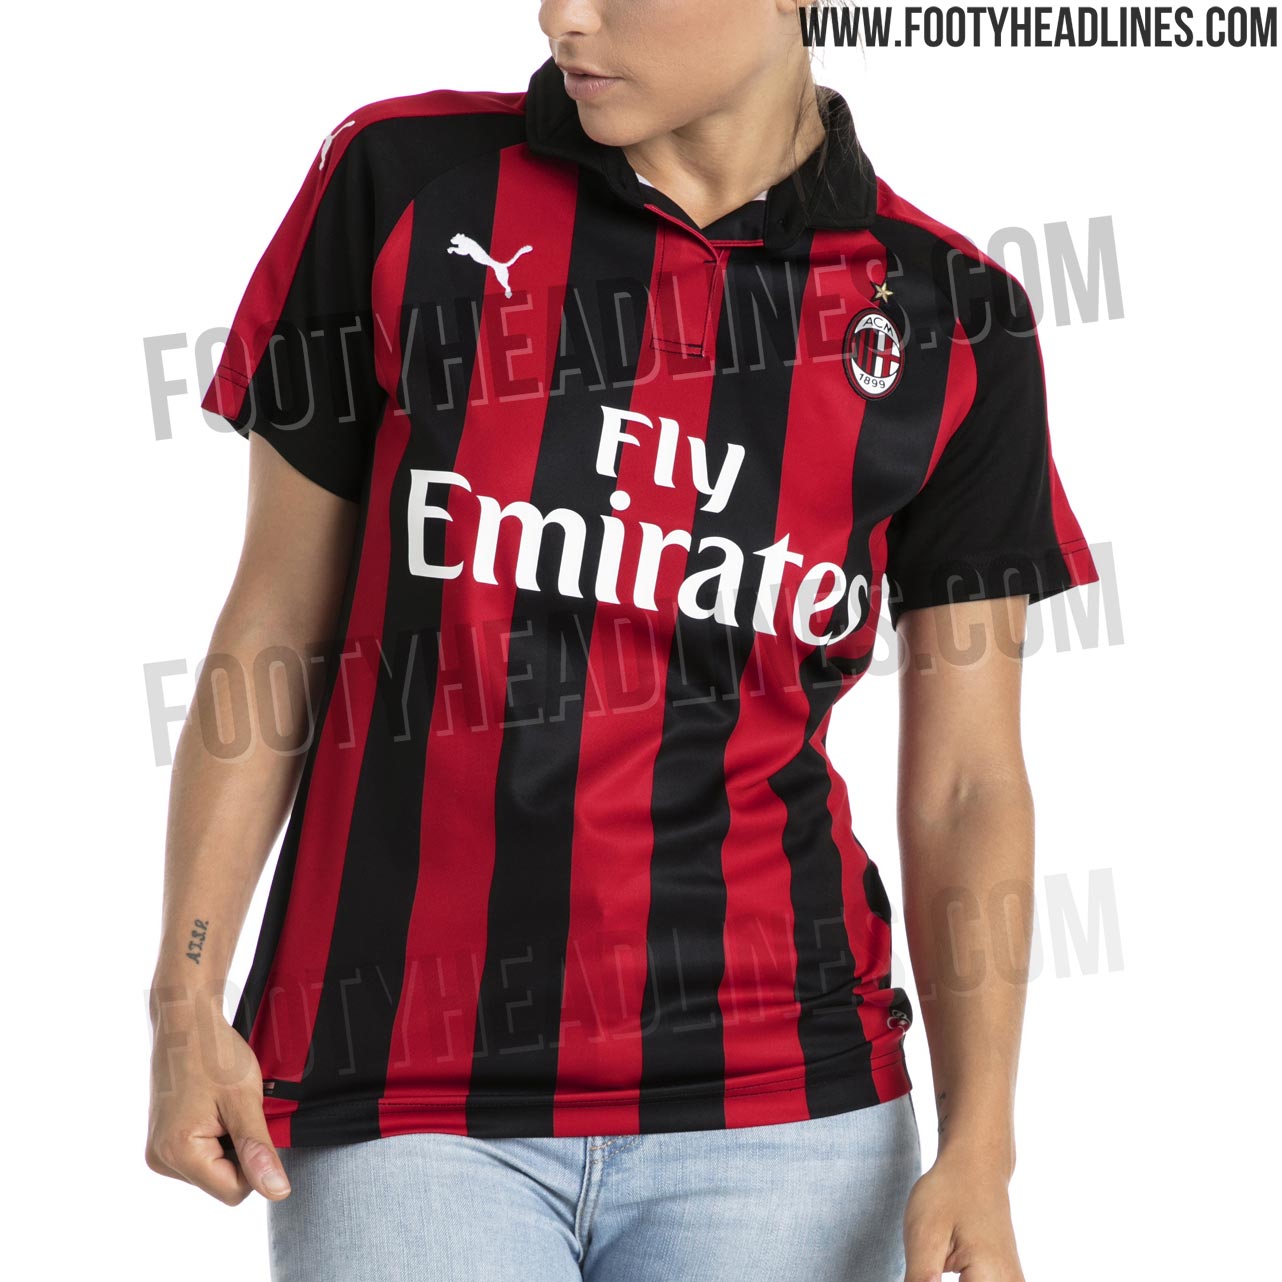 bolita este Cilios A New Milan - Puma AC Milan 2018-19 Home, Away & Third Kits Leaked +  Release Date Revealed - Footy Headlines